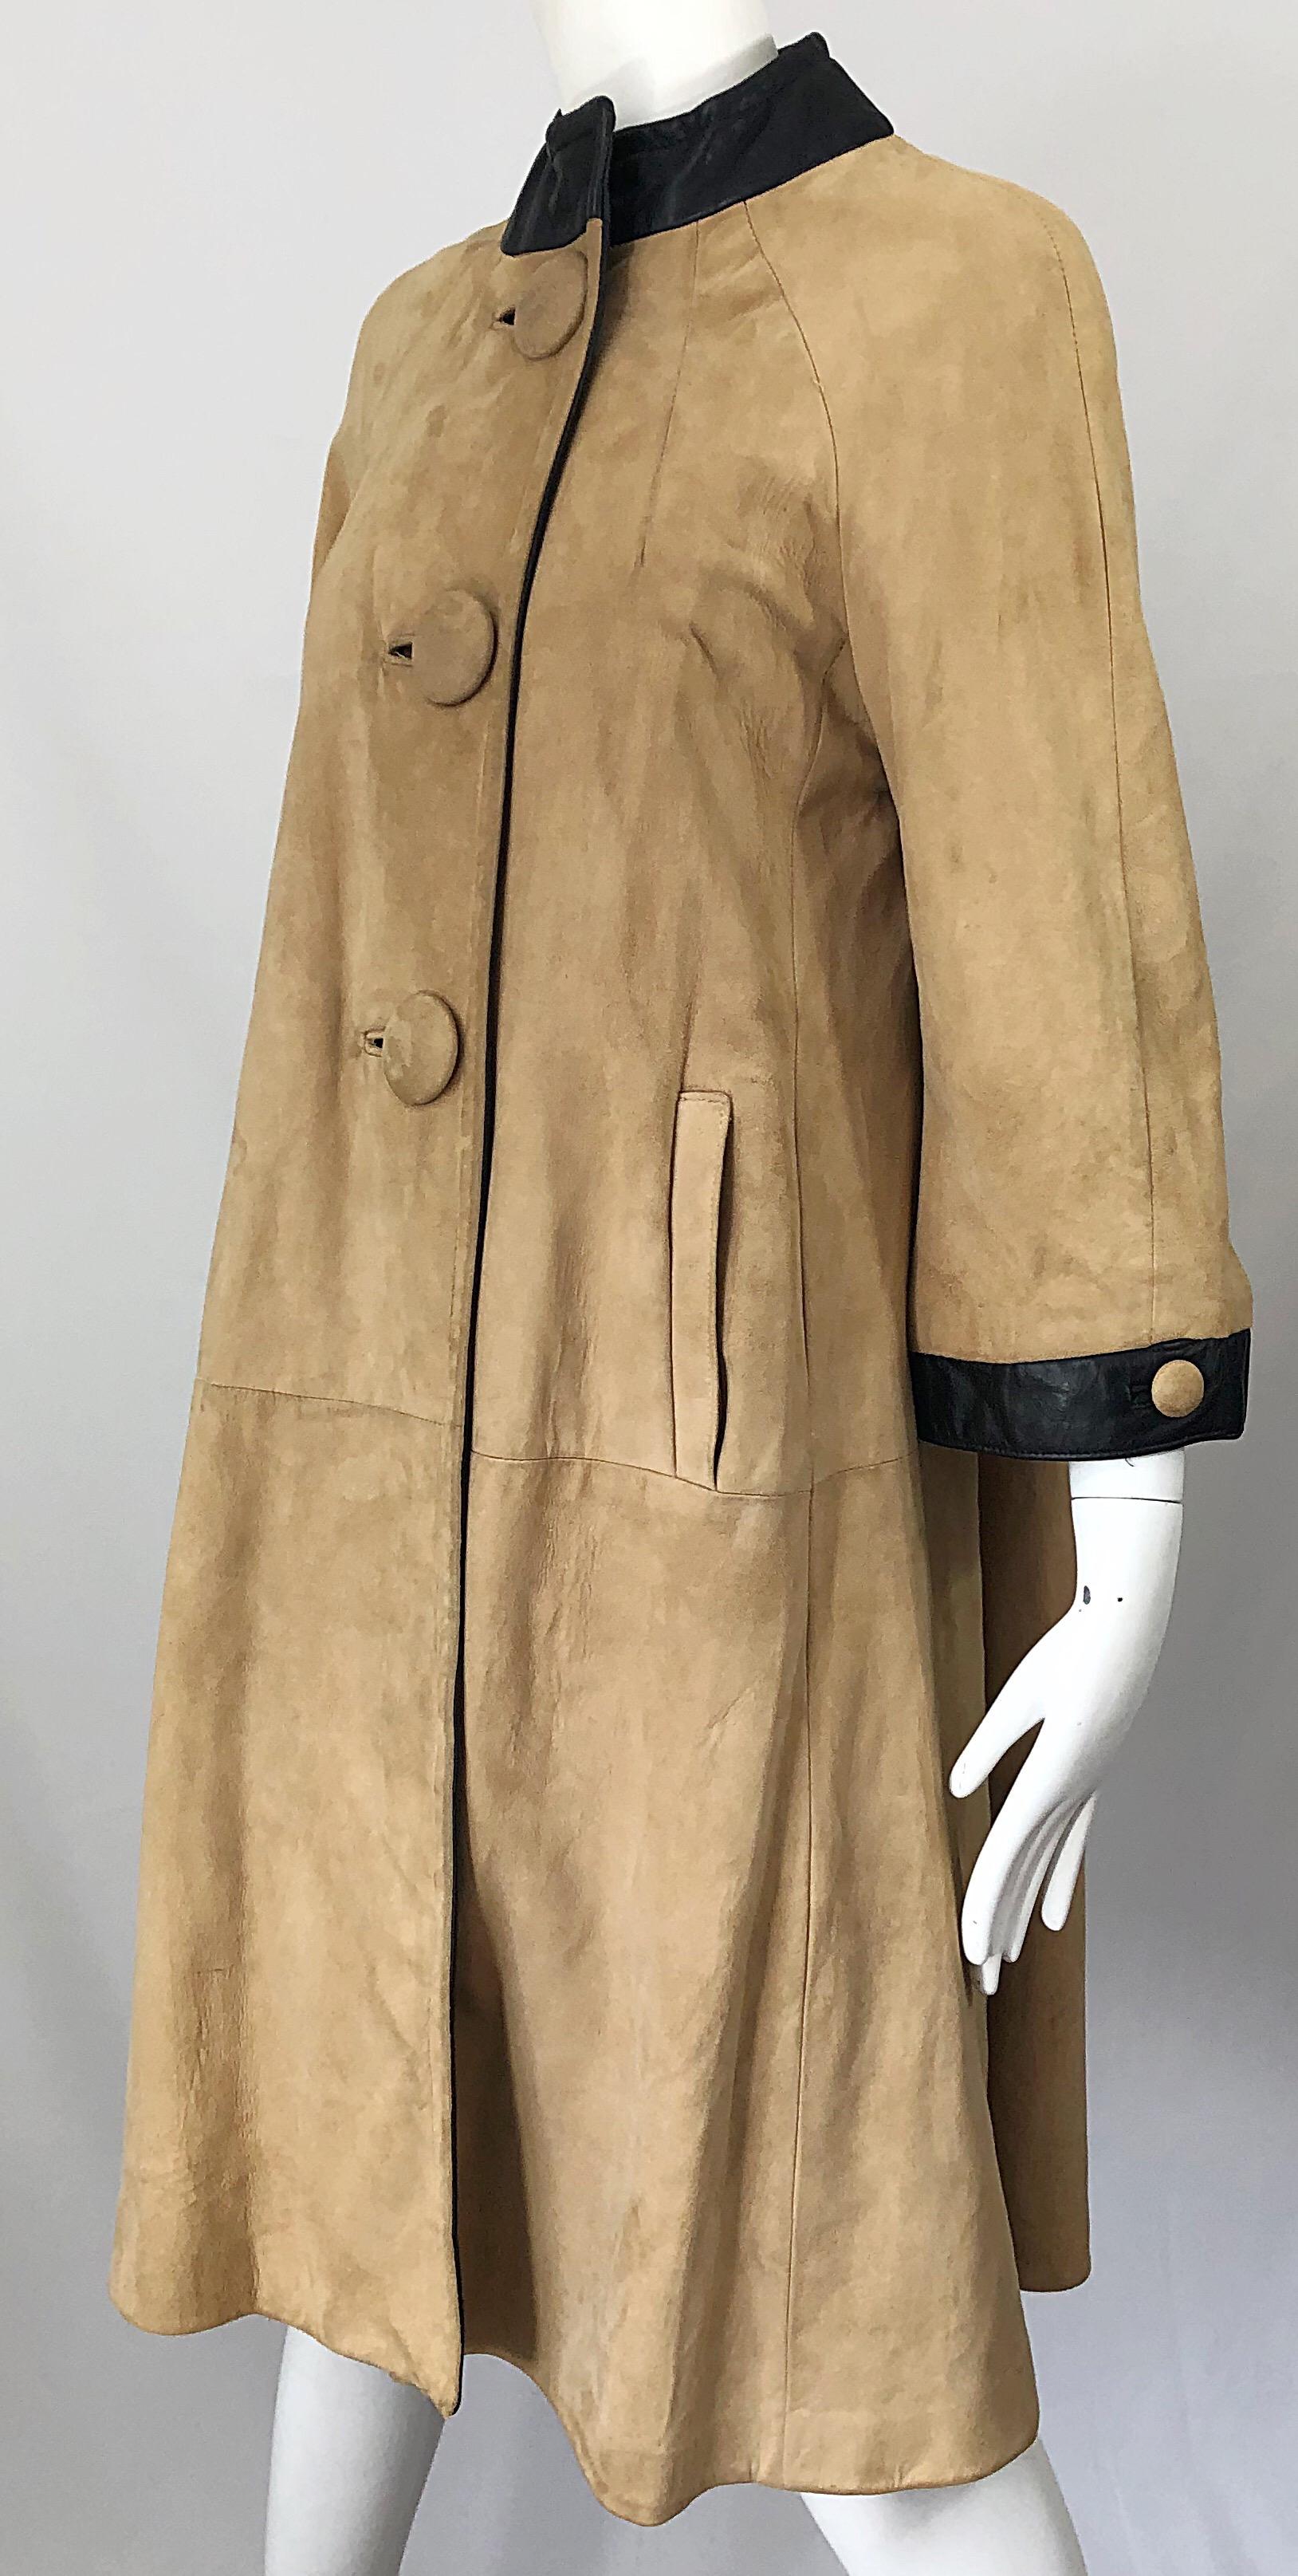 1960s Lillie Rubin Tan + Black Suede and Leather Vintage 60s Swing Jacket Coat 3